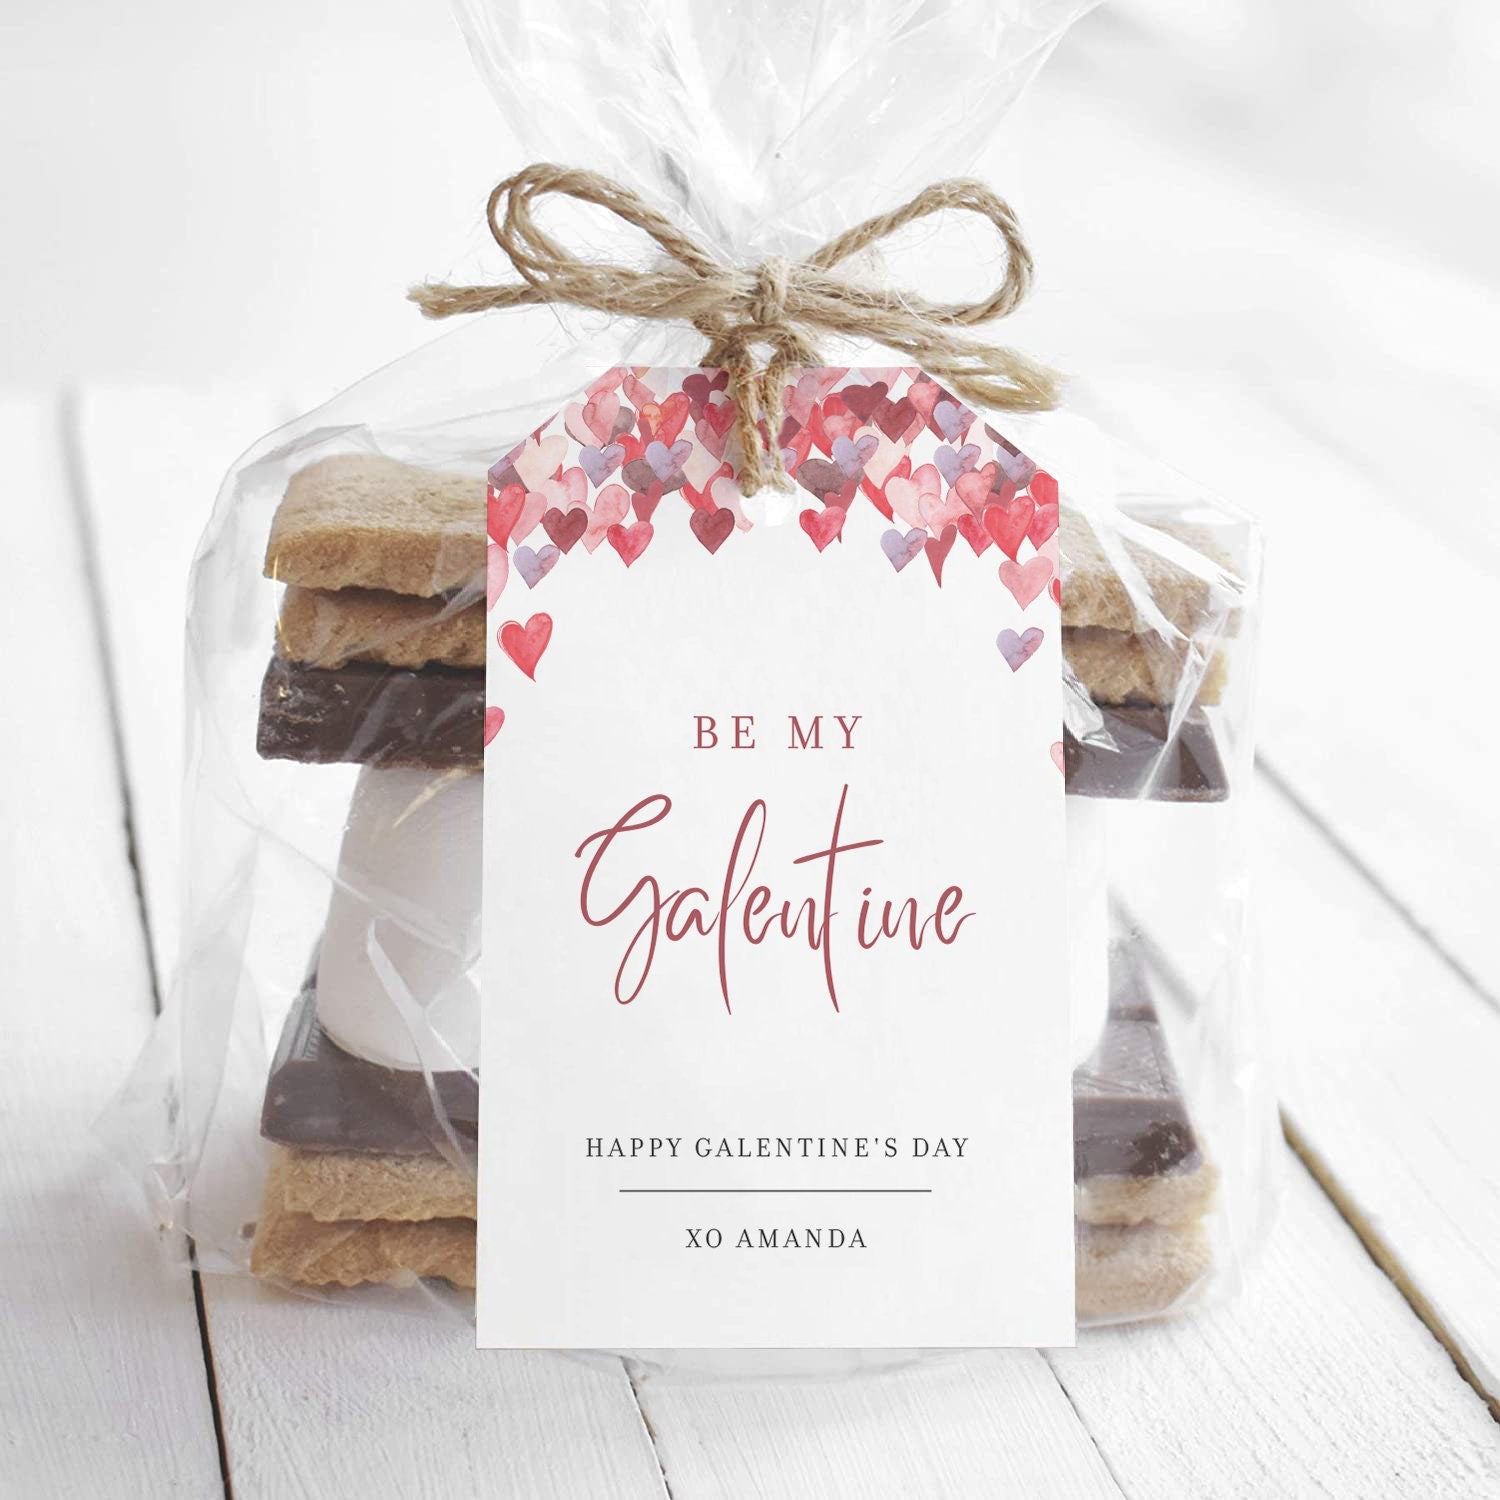 Printable Galentines Day Favor Tags Template, Galentines Gift Tags, Galentines Day Party Favor Tag, Editable DIGITAL DOWNLOAD - VH100